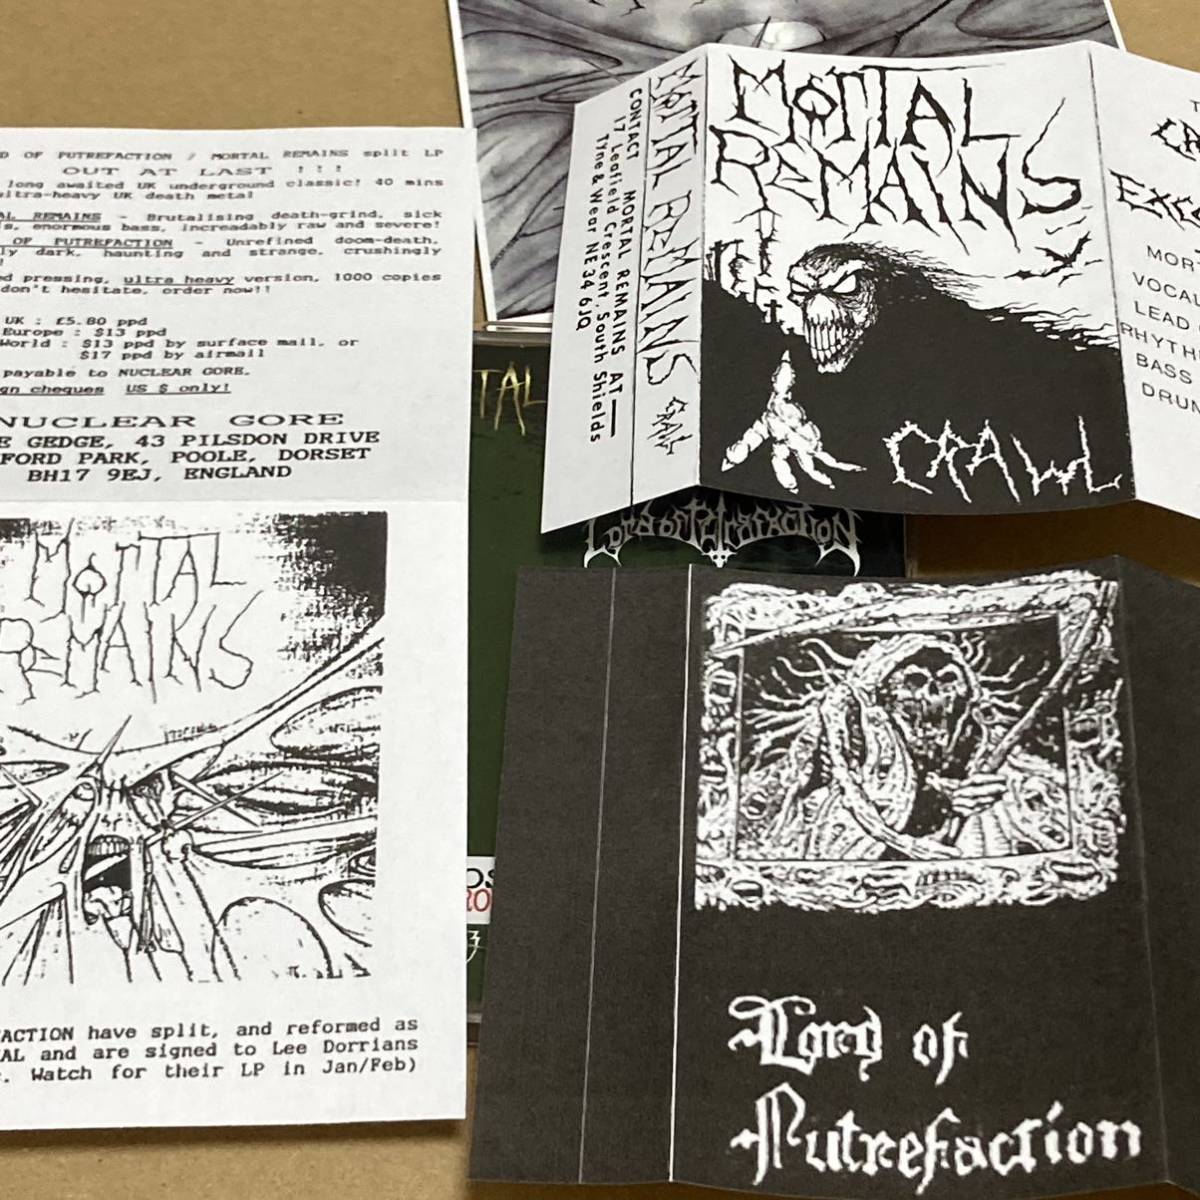 Lord of Putrefaction Mortal Remains CDr 2枚組 death doom metal デスメタル ドゥーム electric wizard napalm death bolt thrower_画像5